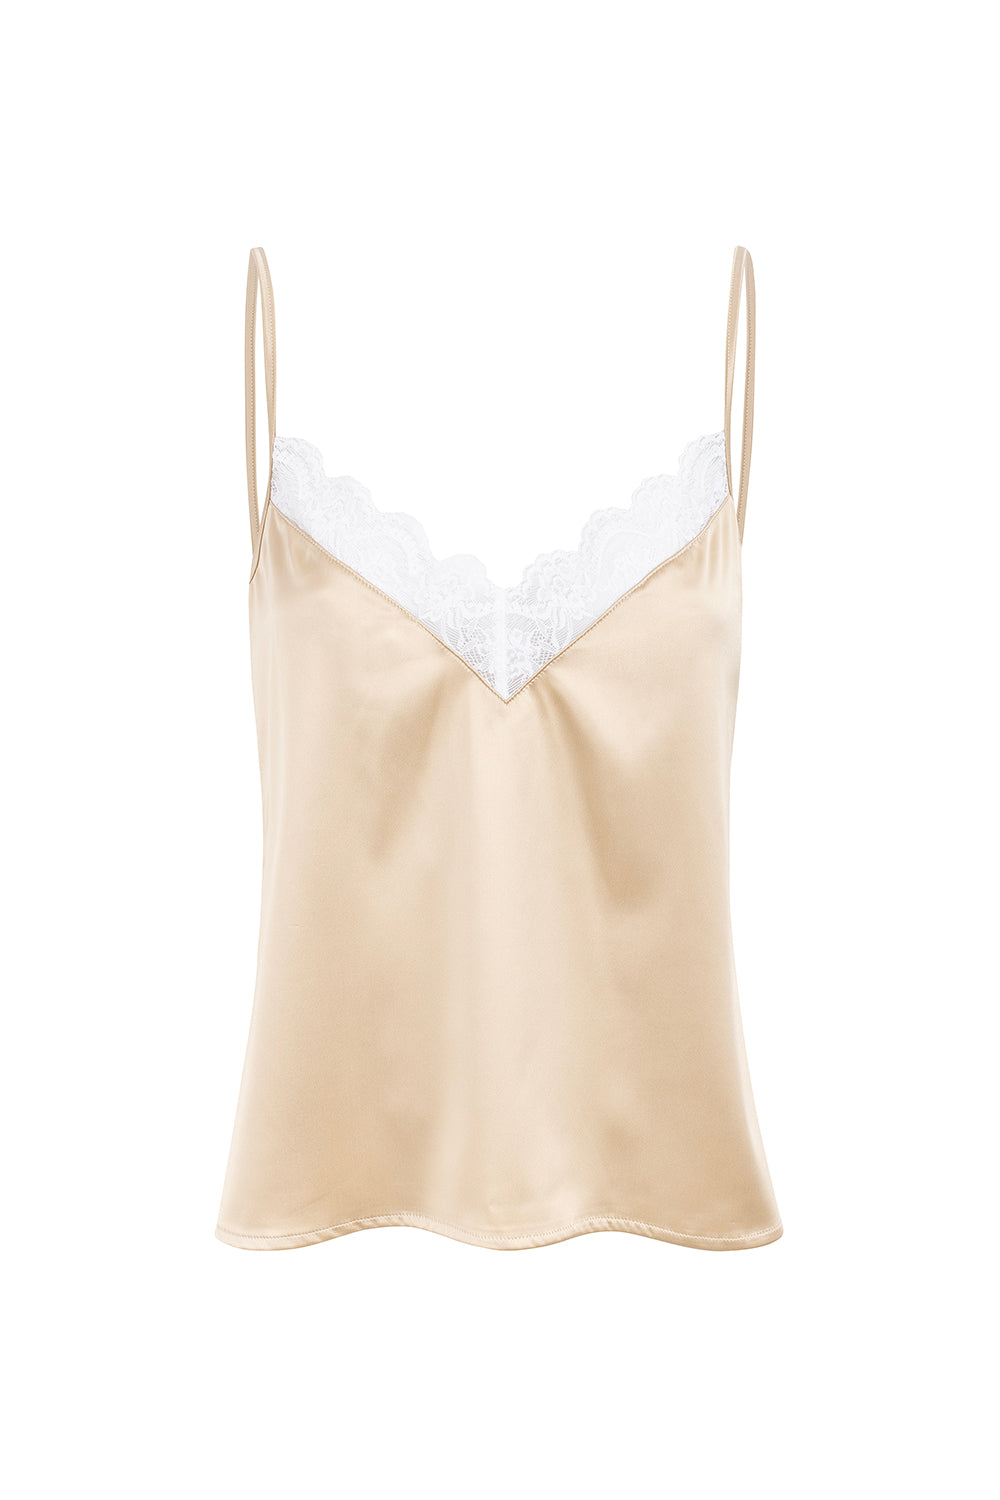 CHAMPAGNE SATIN & LACE TOP (OUT OF STOCK)